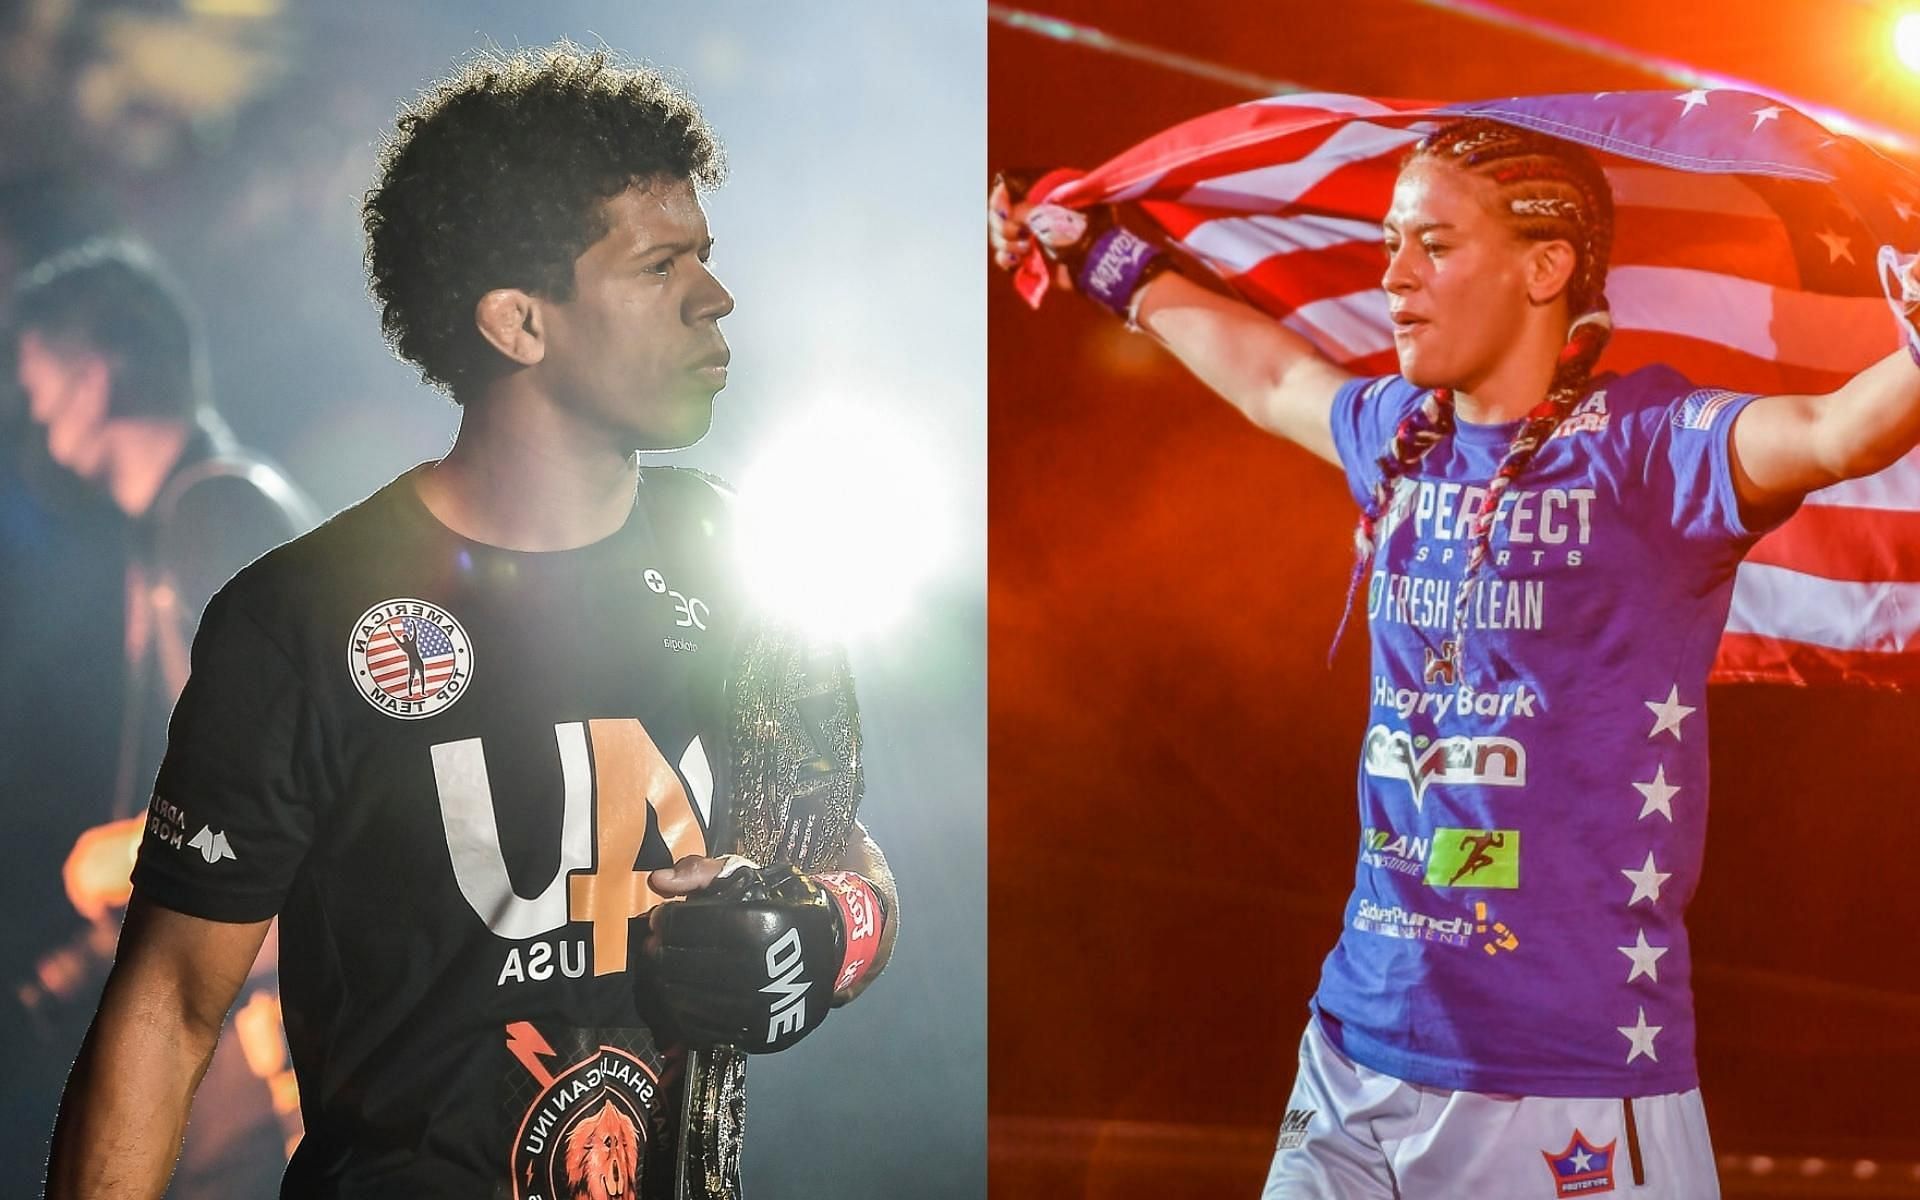 ONE flyweight world champ Adriano Moraes (left) supports his teammate Alyse Anderson (right) ahead of ONE 157 (Images courtesy of ONE Championship)